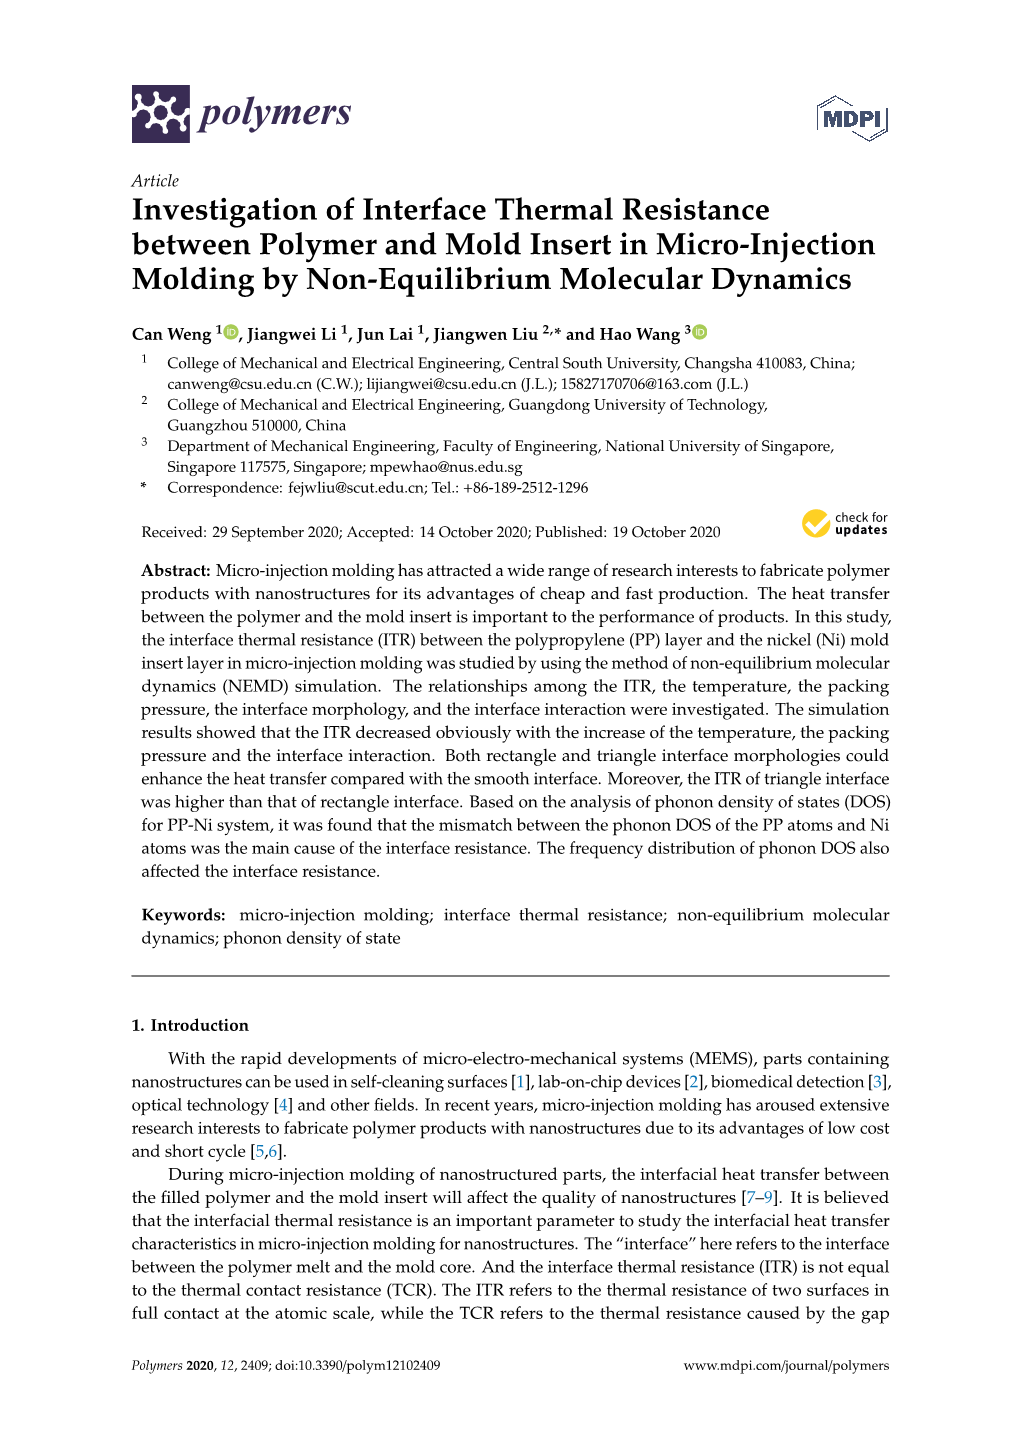 Investigation of Interface Thermal Resistance Between Polymer and Mold Insert in Micro-Injection Molding by Non-Equilibrium Molecular Dynamics